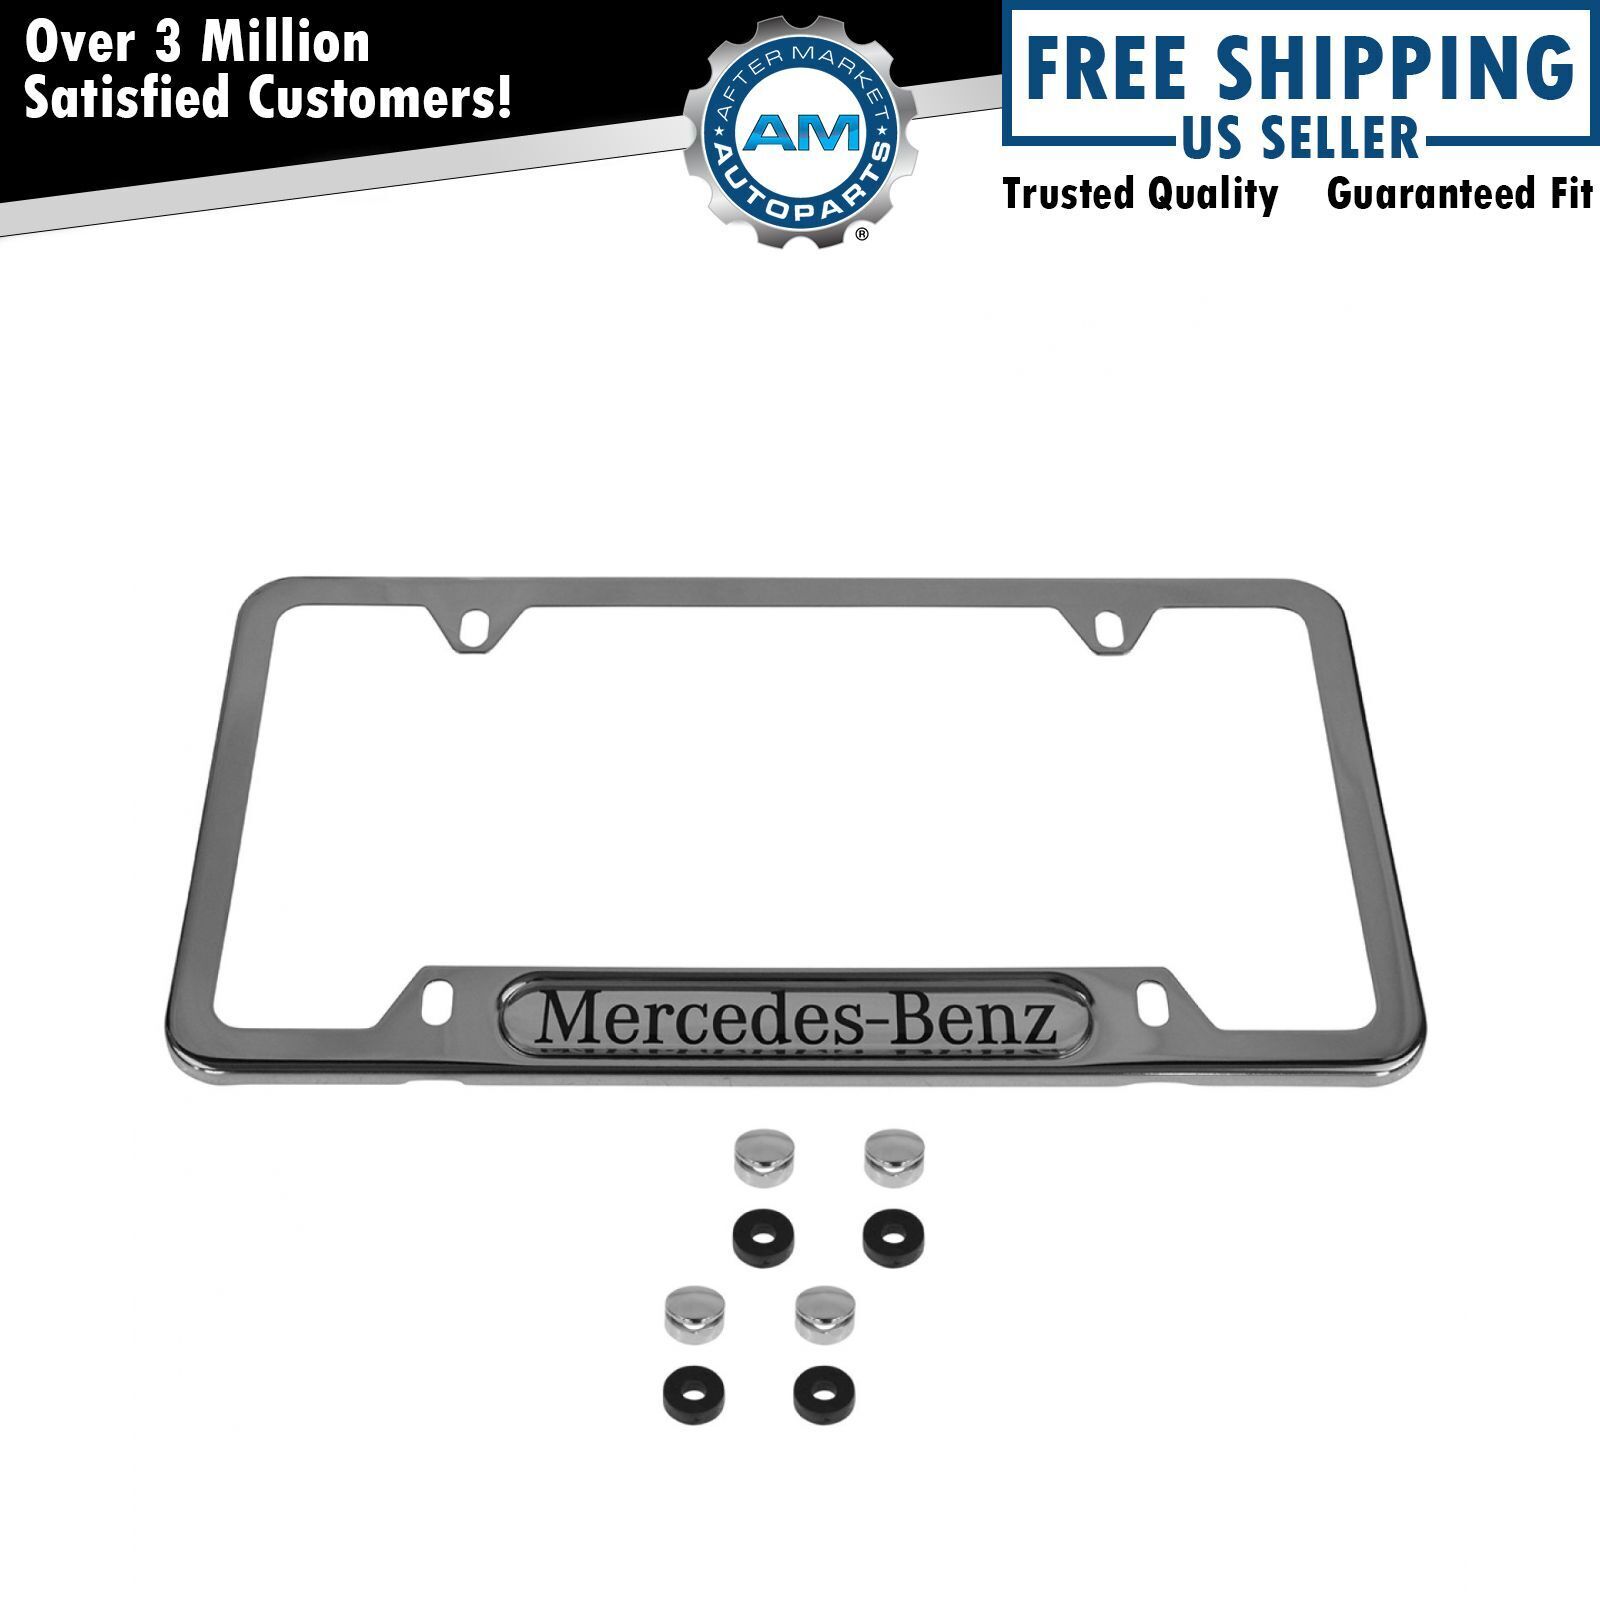 OEM Polished Stainless Steel License Name Plate Frame for Mercedes Benz Q6880086